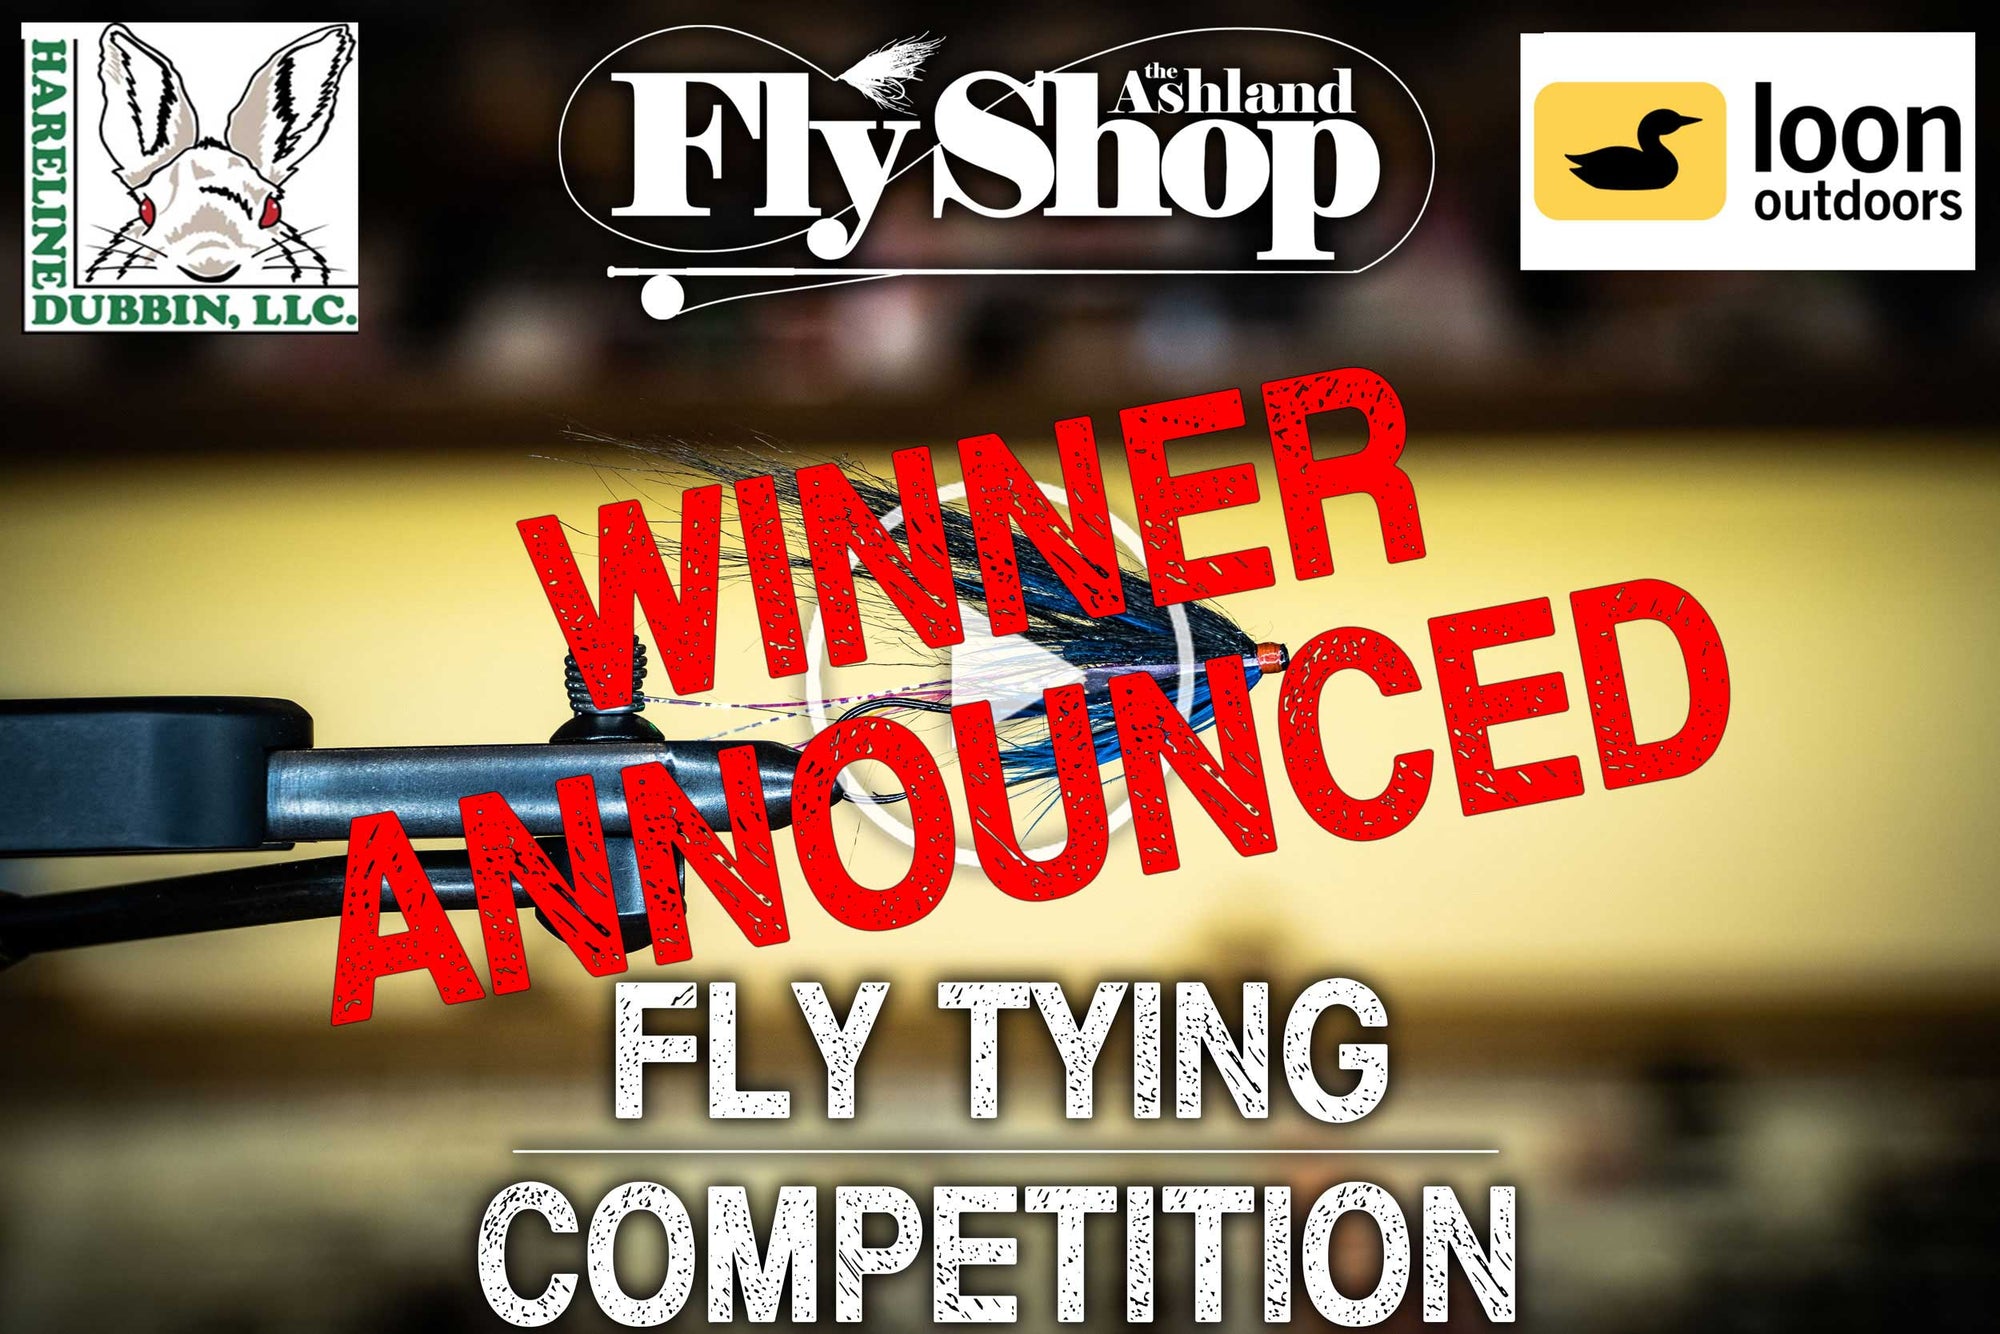 AFS Tying Contest Winner Announcement